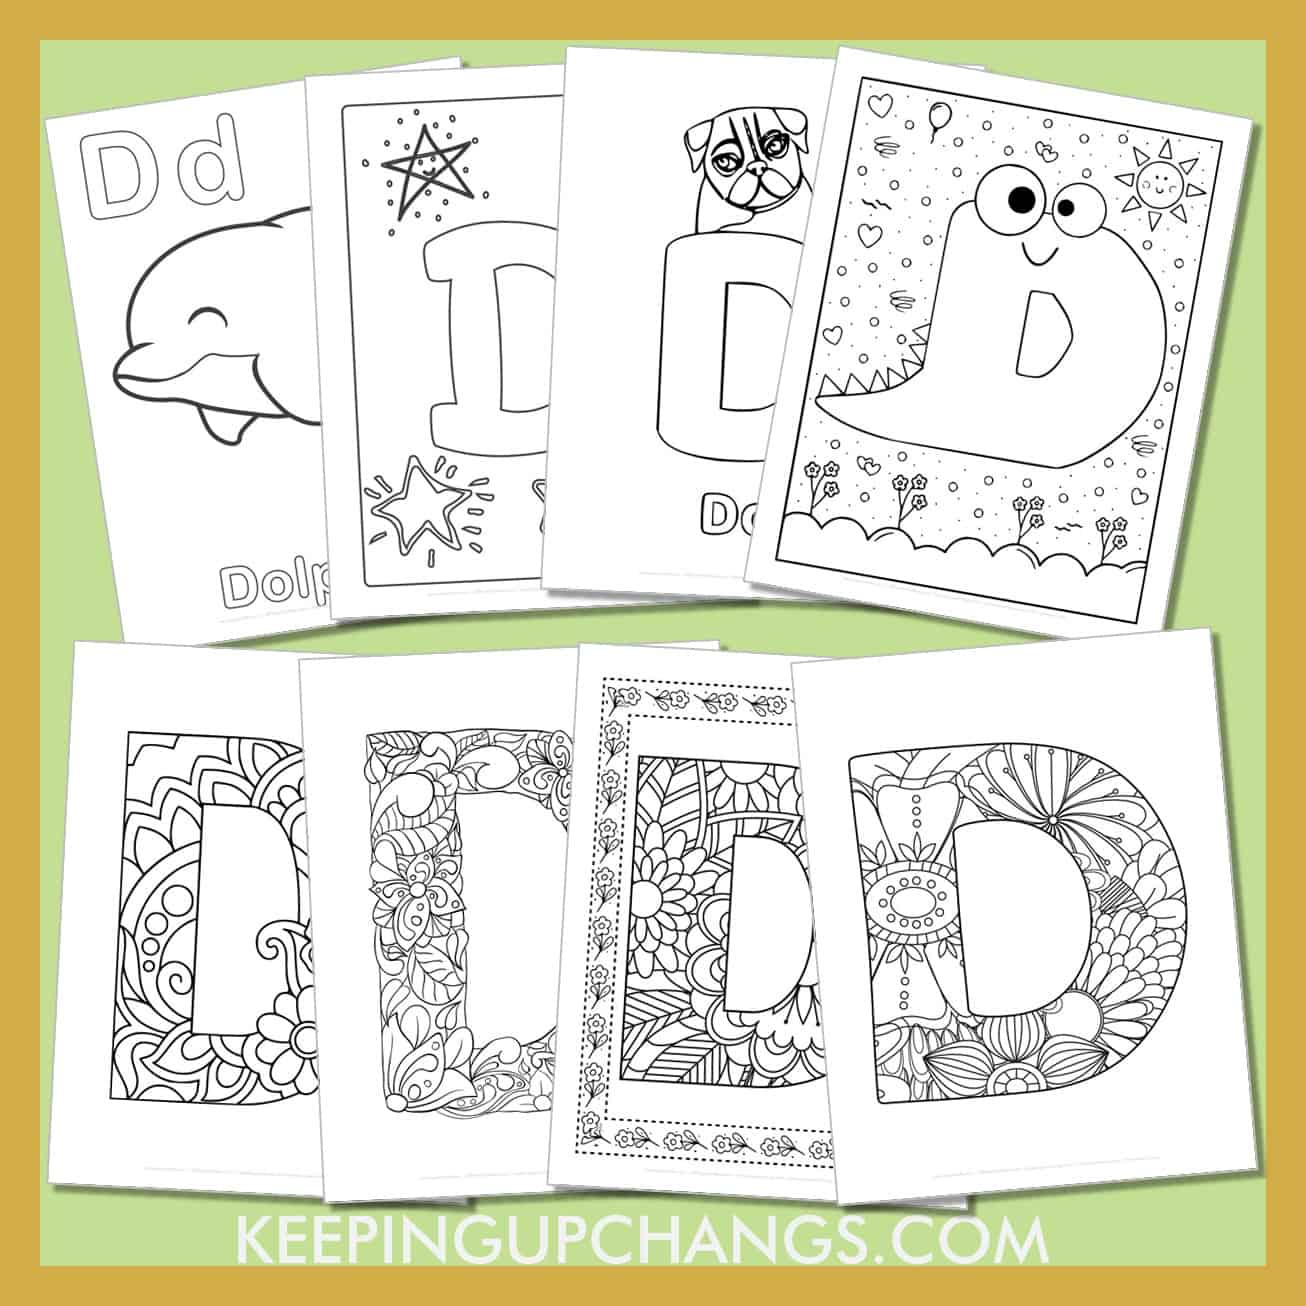 free alphabet letter d to color for toddlers, preschool, kindergarten, to adults.